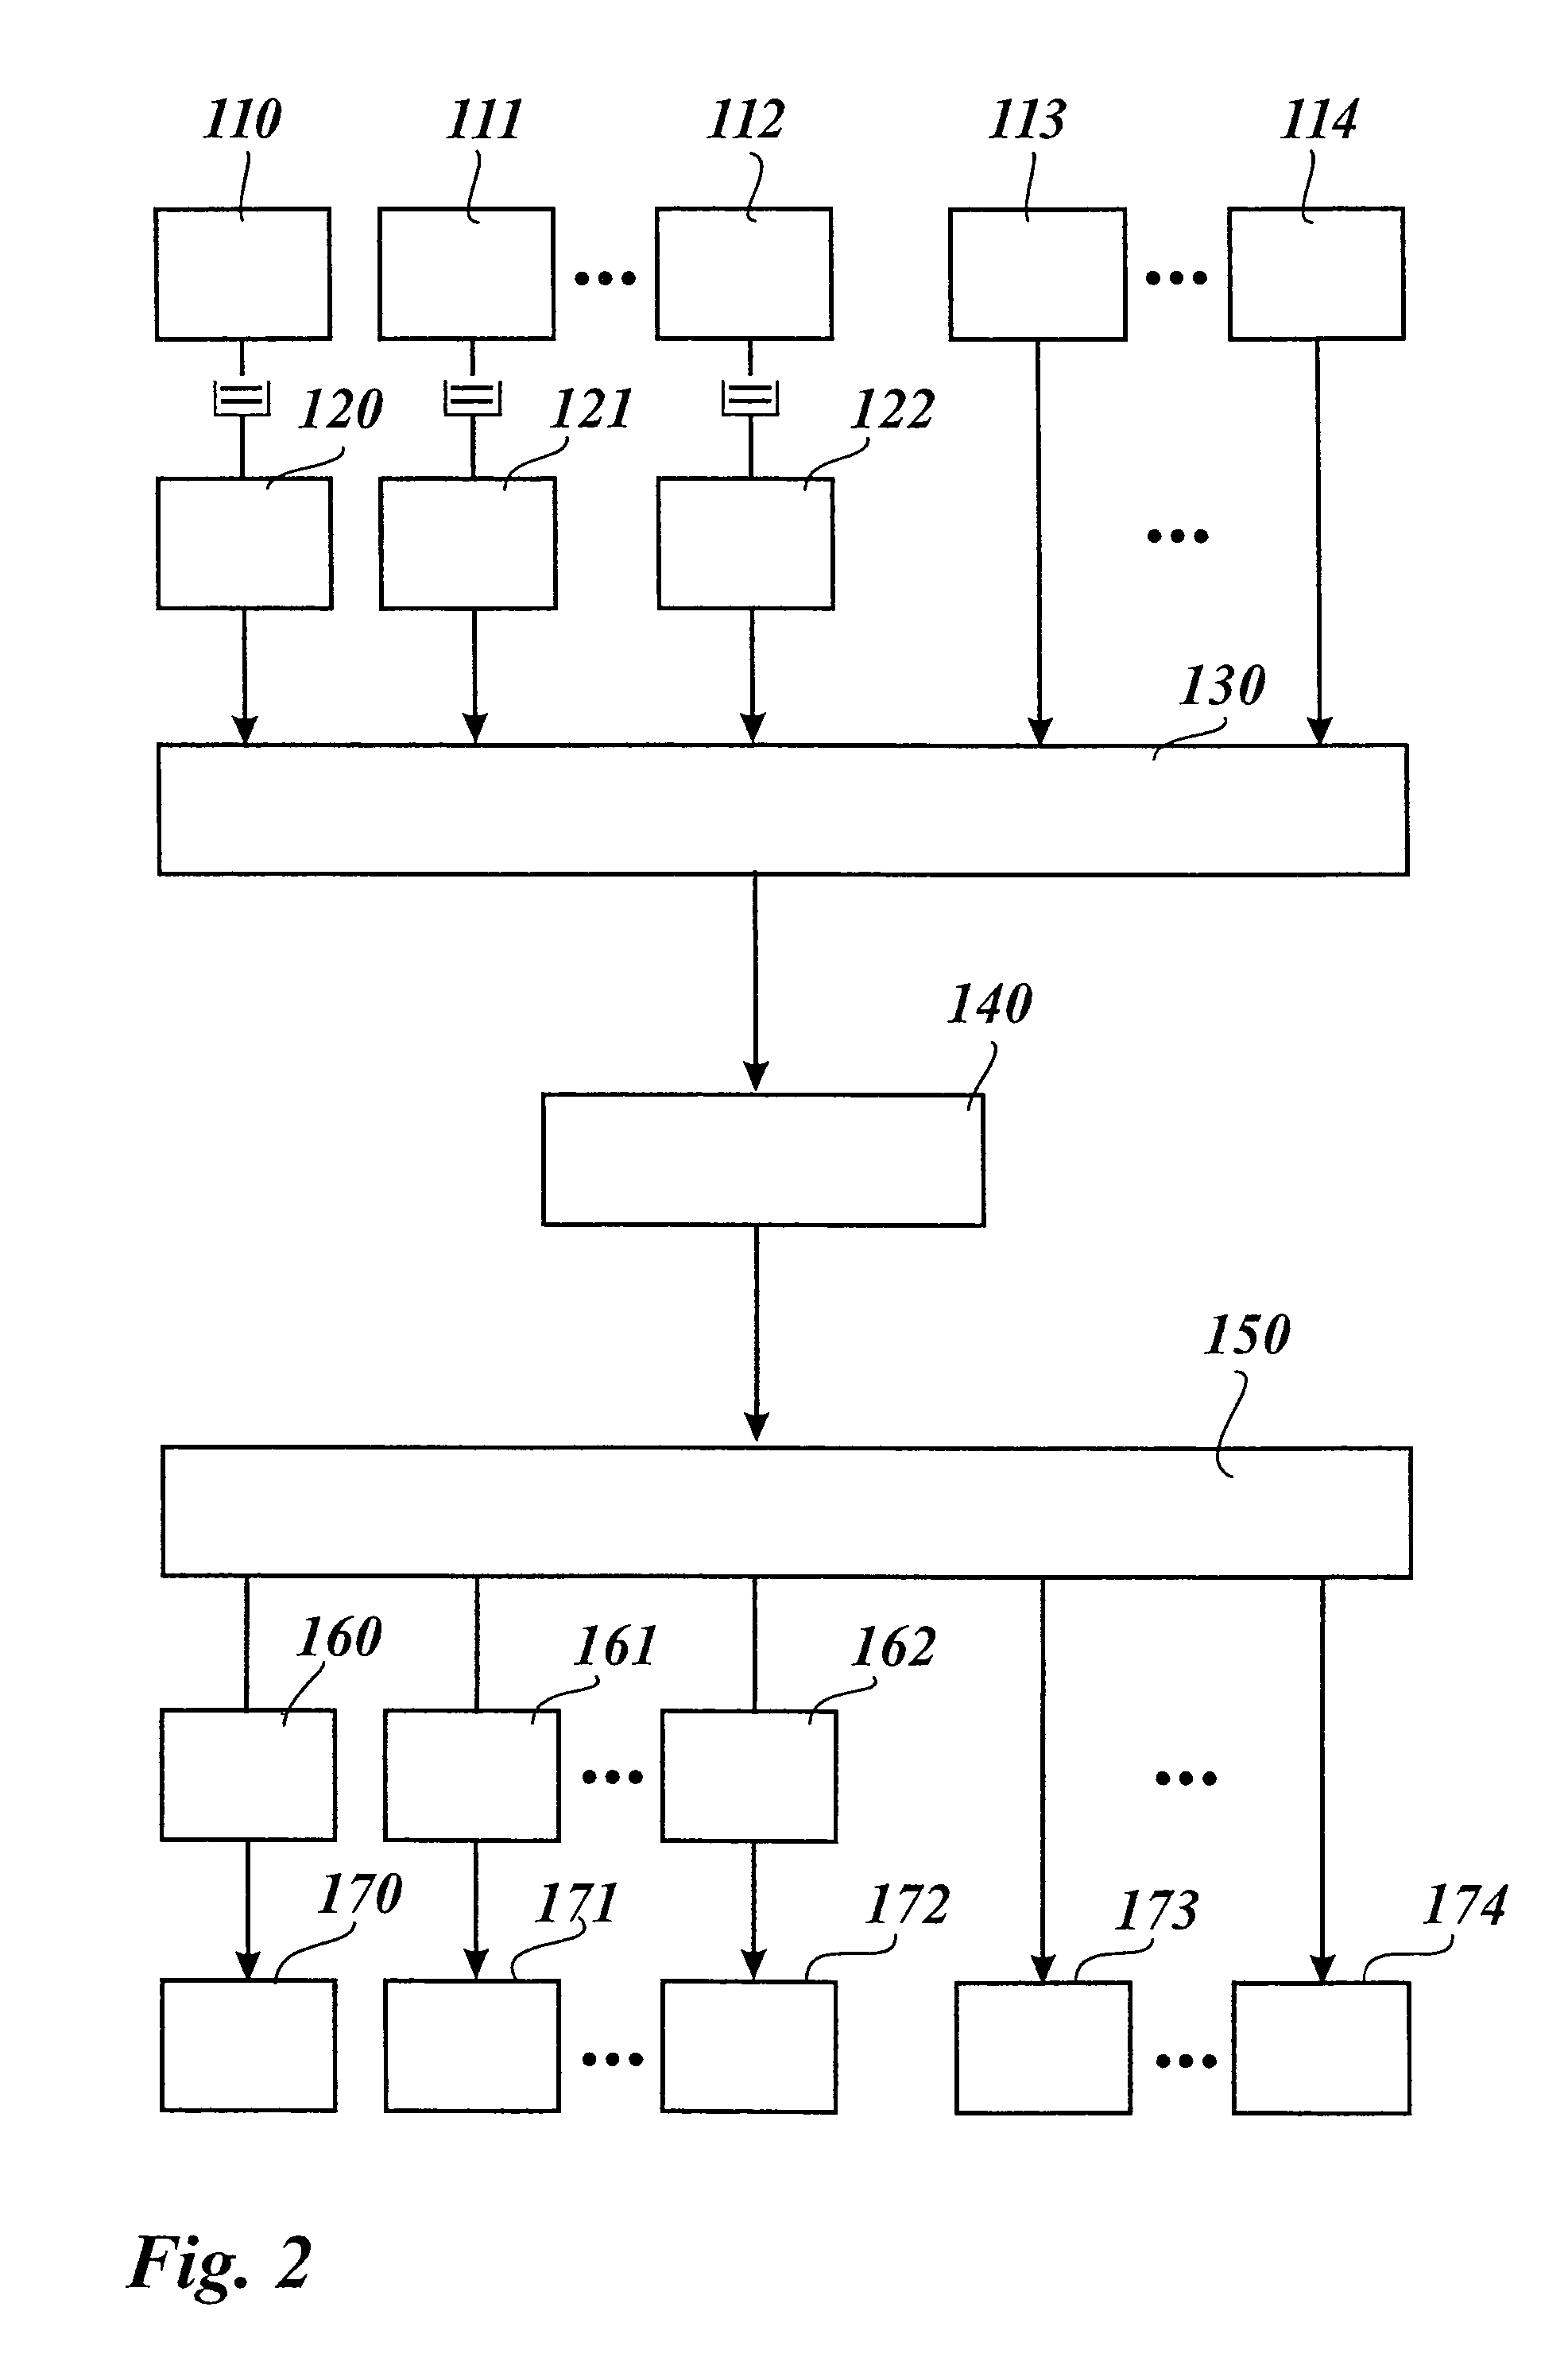 Method of providing a real-time communication connection